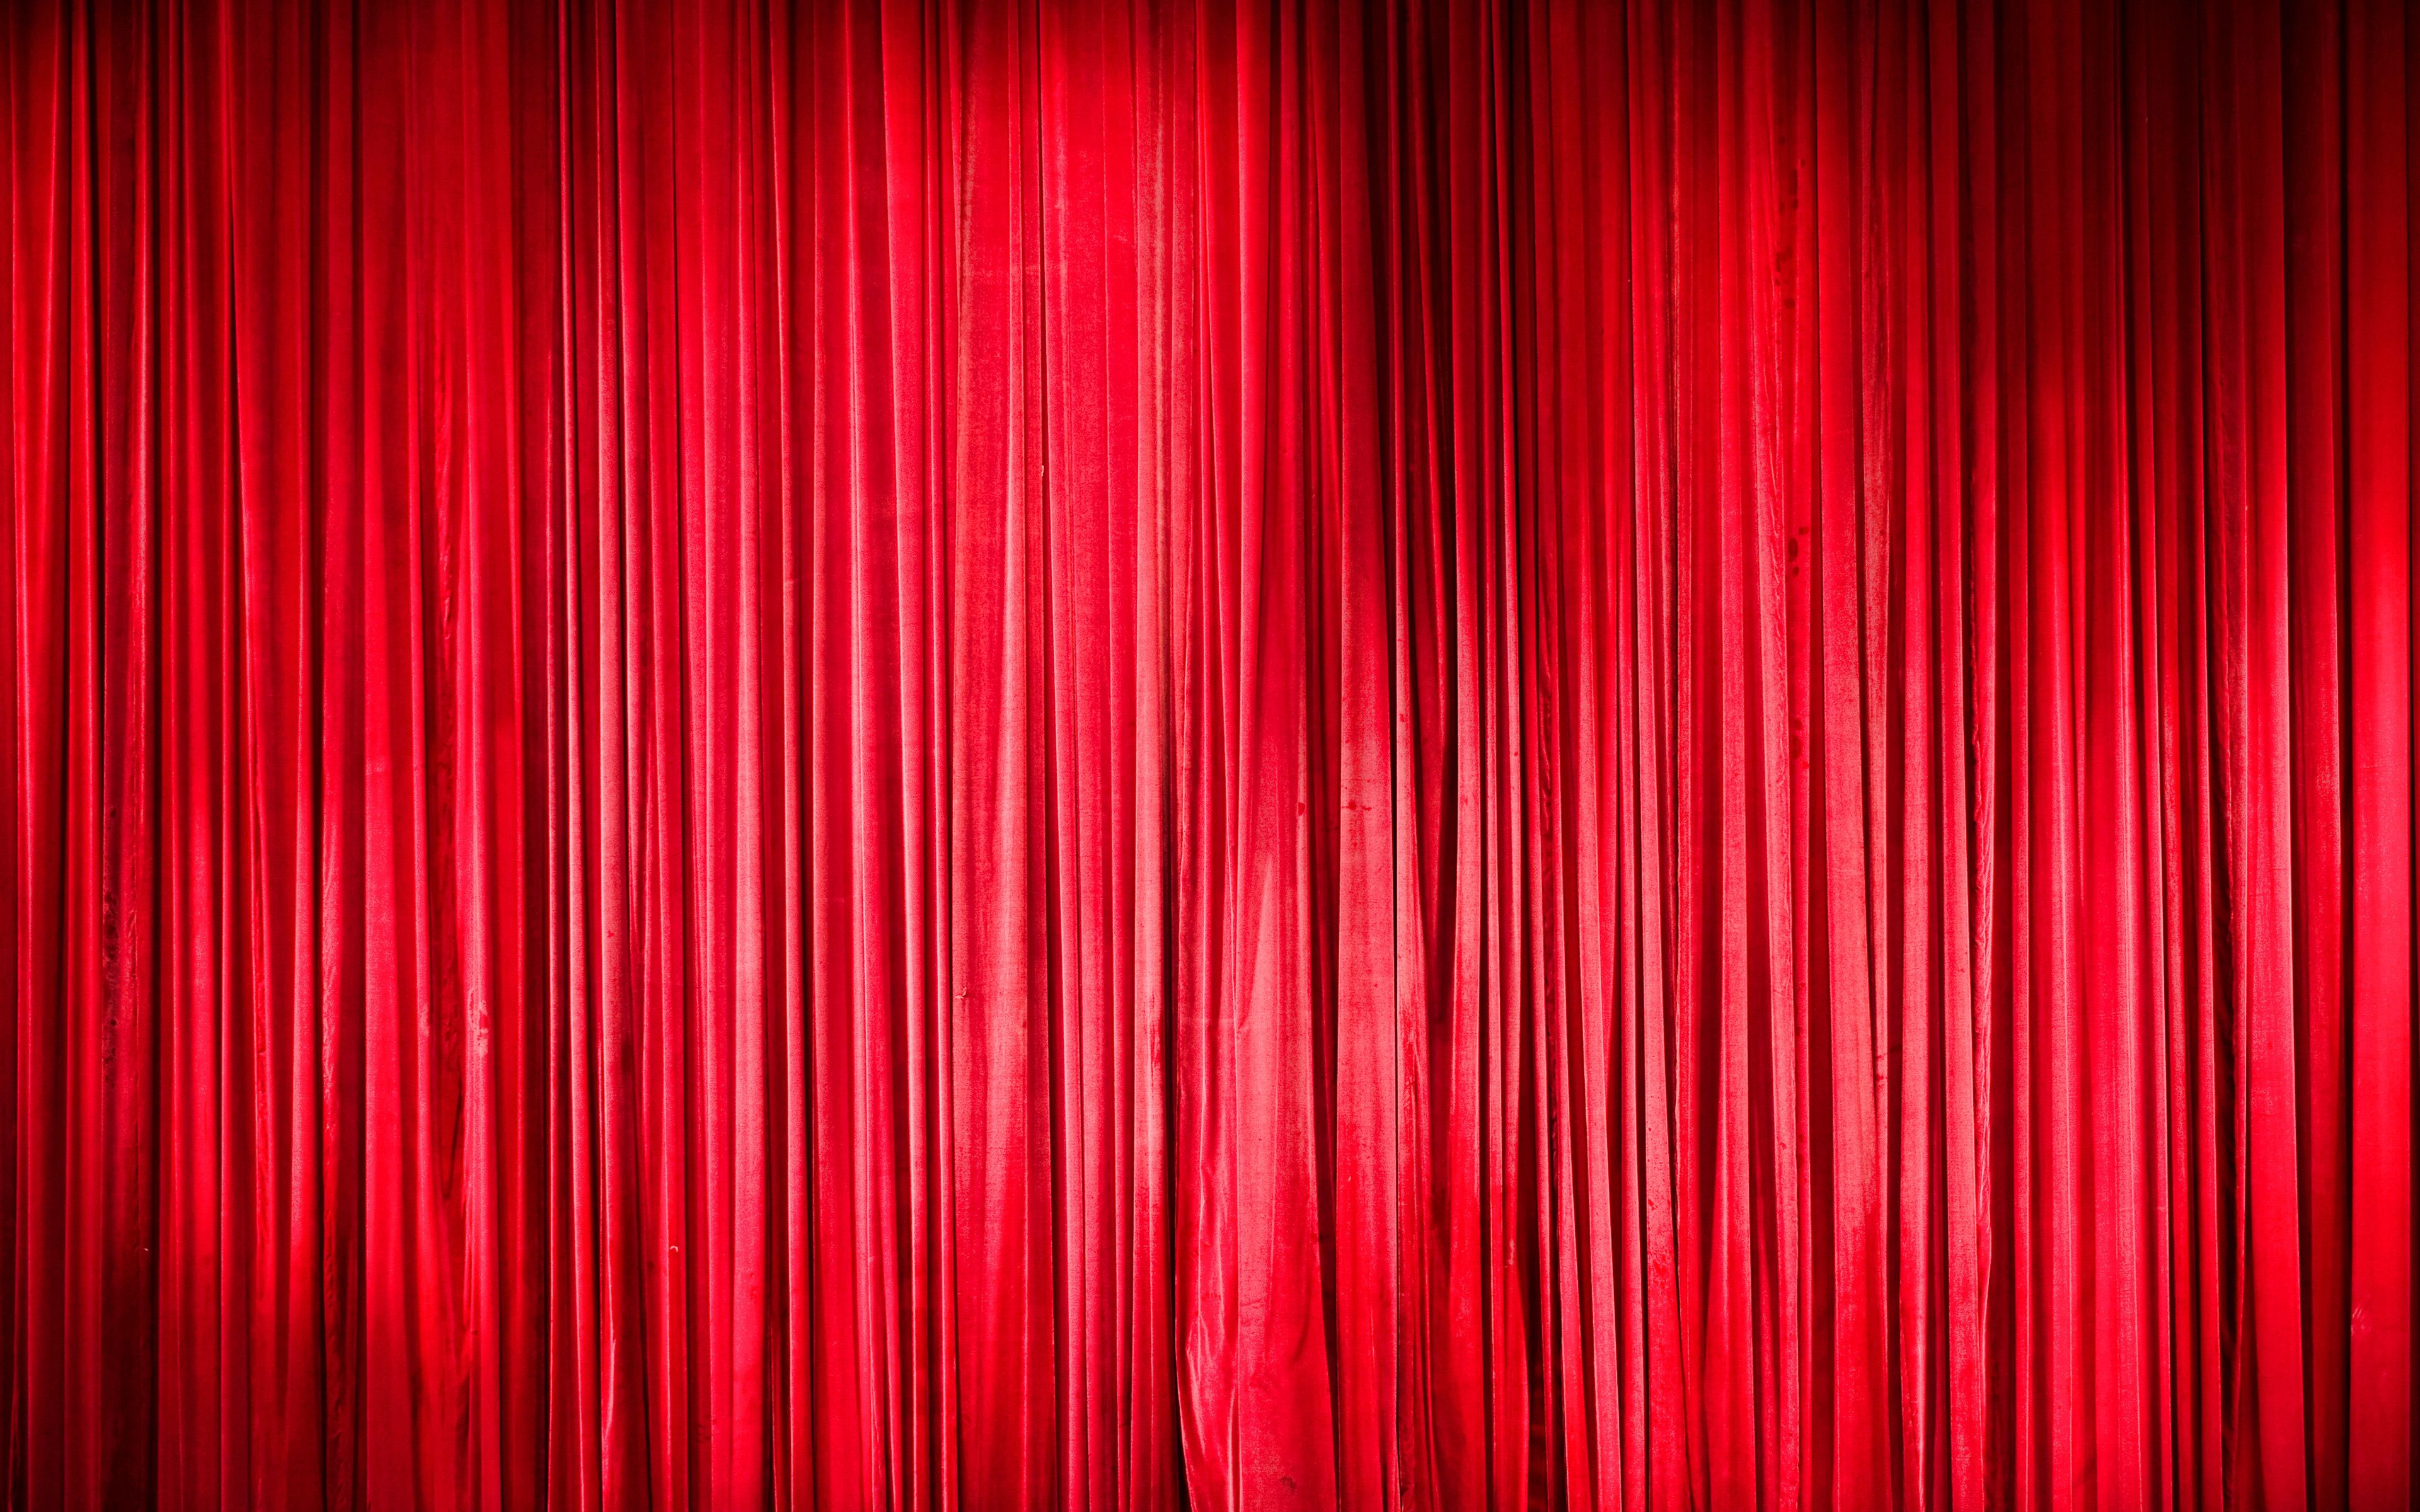 Download wallpaper red curtain, 4k, red fabric, theater, screen, red silk, red velvet, fabric texture, curtain for desktop with resolution 3840x2400. High Quality HD picture wallpaper